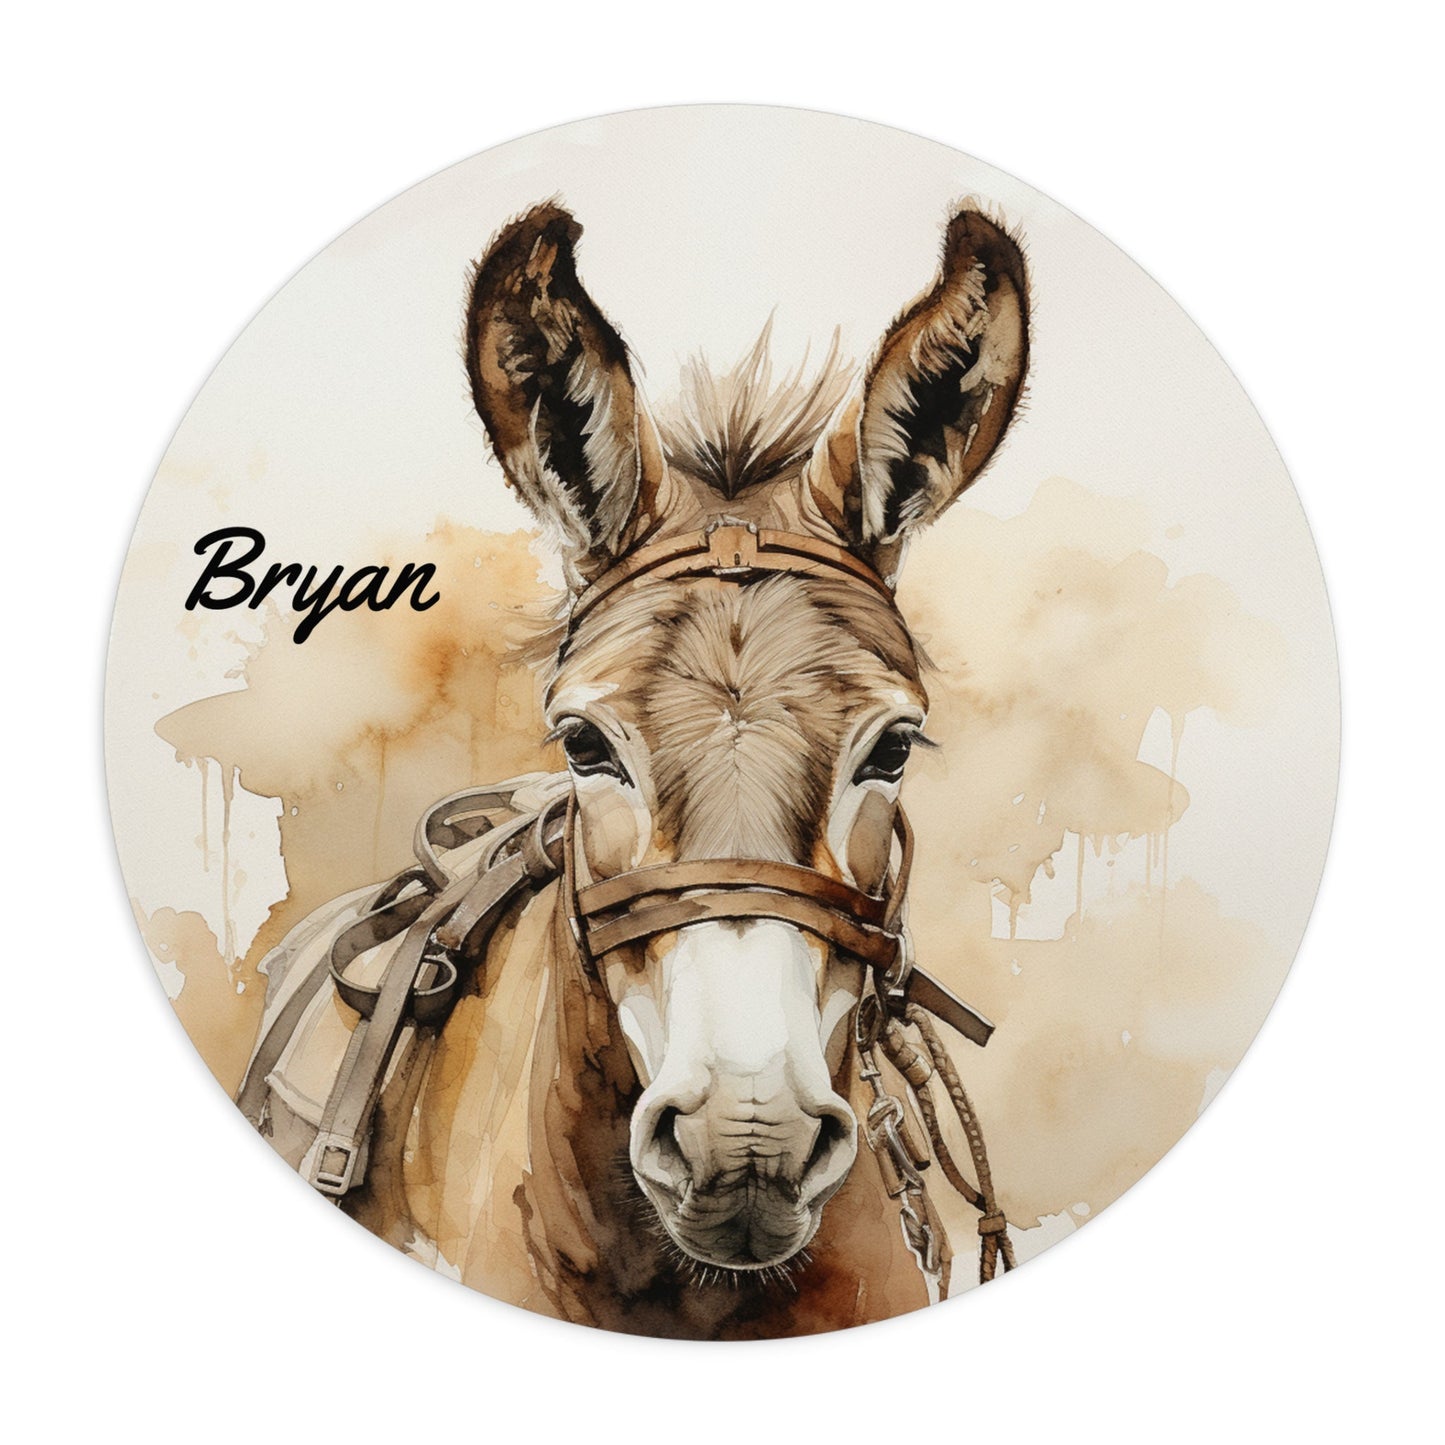 Cute Donkey in Harness Mouse Pad, Personalized Donkey Mouse Pad - FlooredByArt